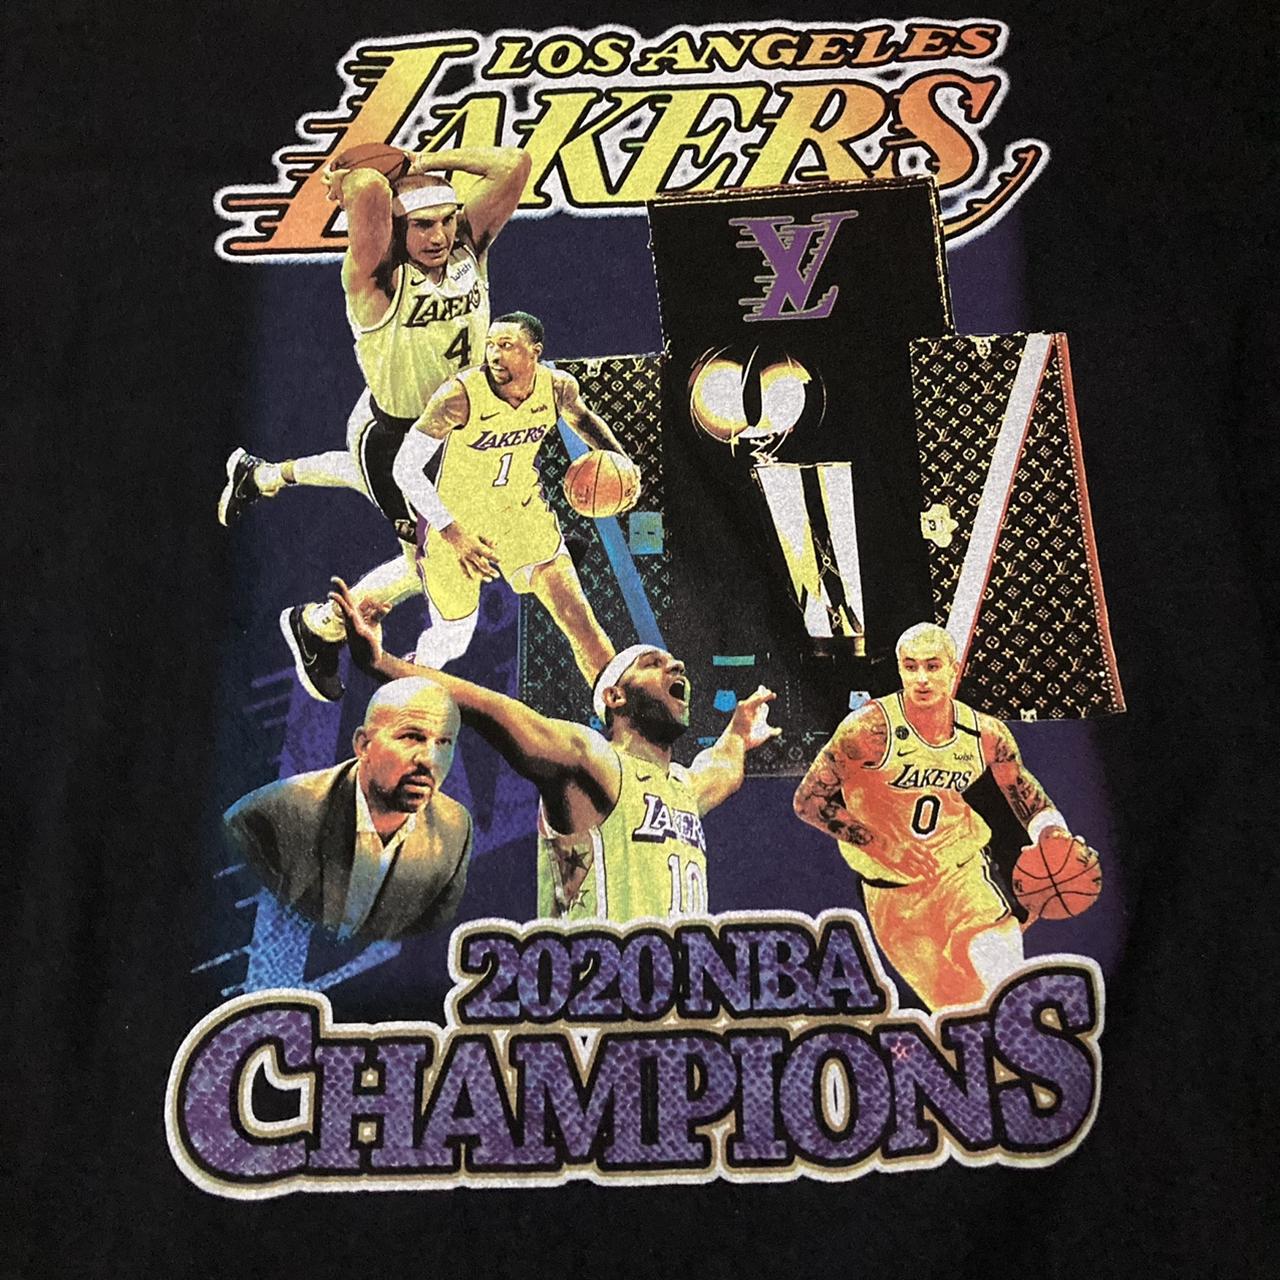 2020 Lakers Championship Hoodie size L (25x27) for $40 available now!  #whatsgoodvintage